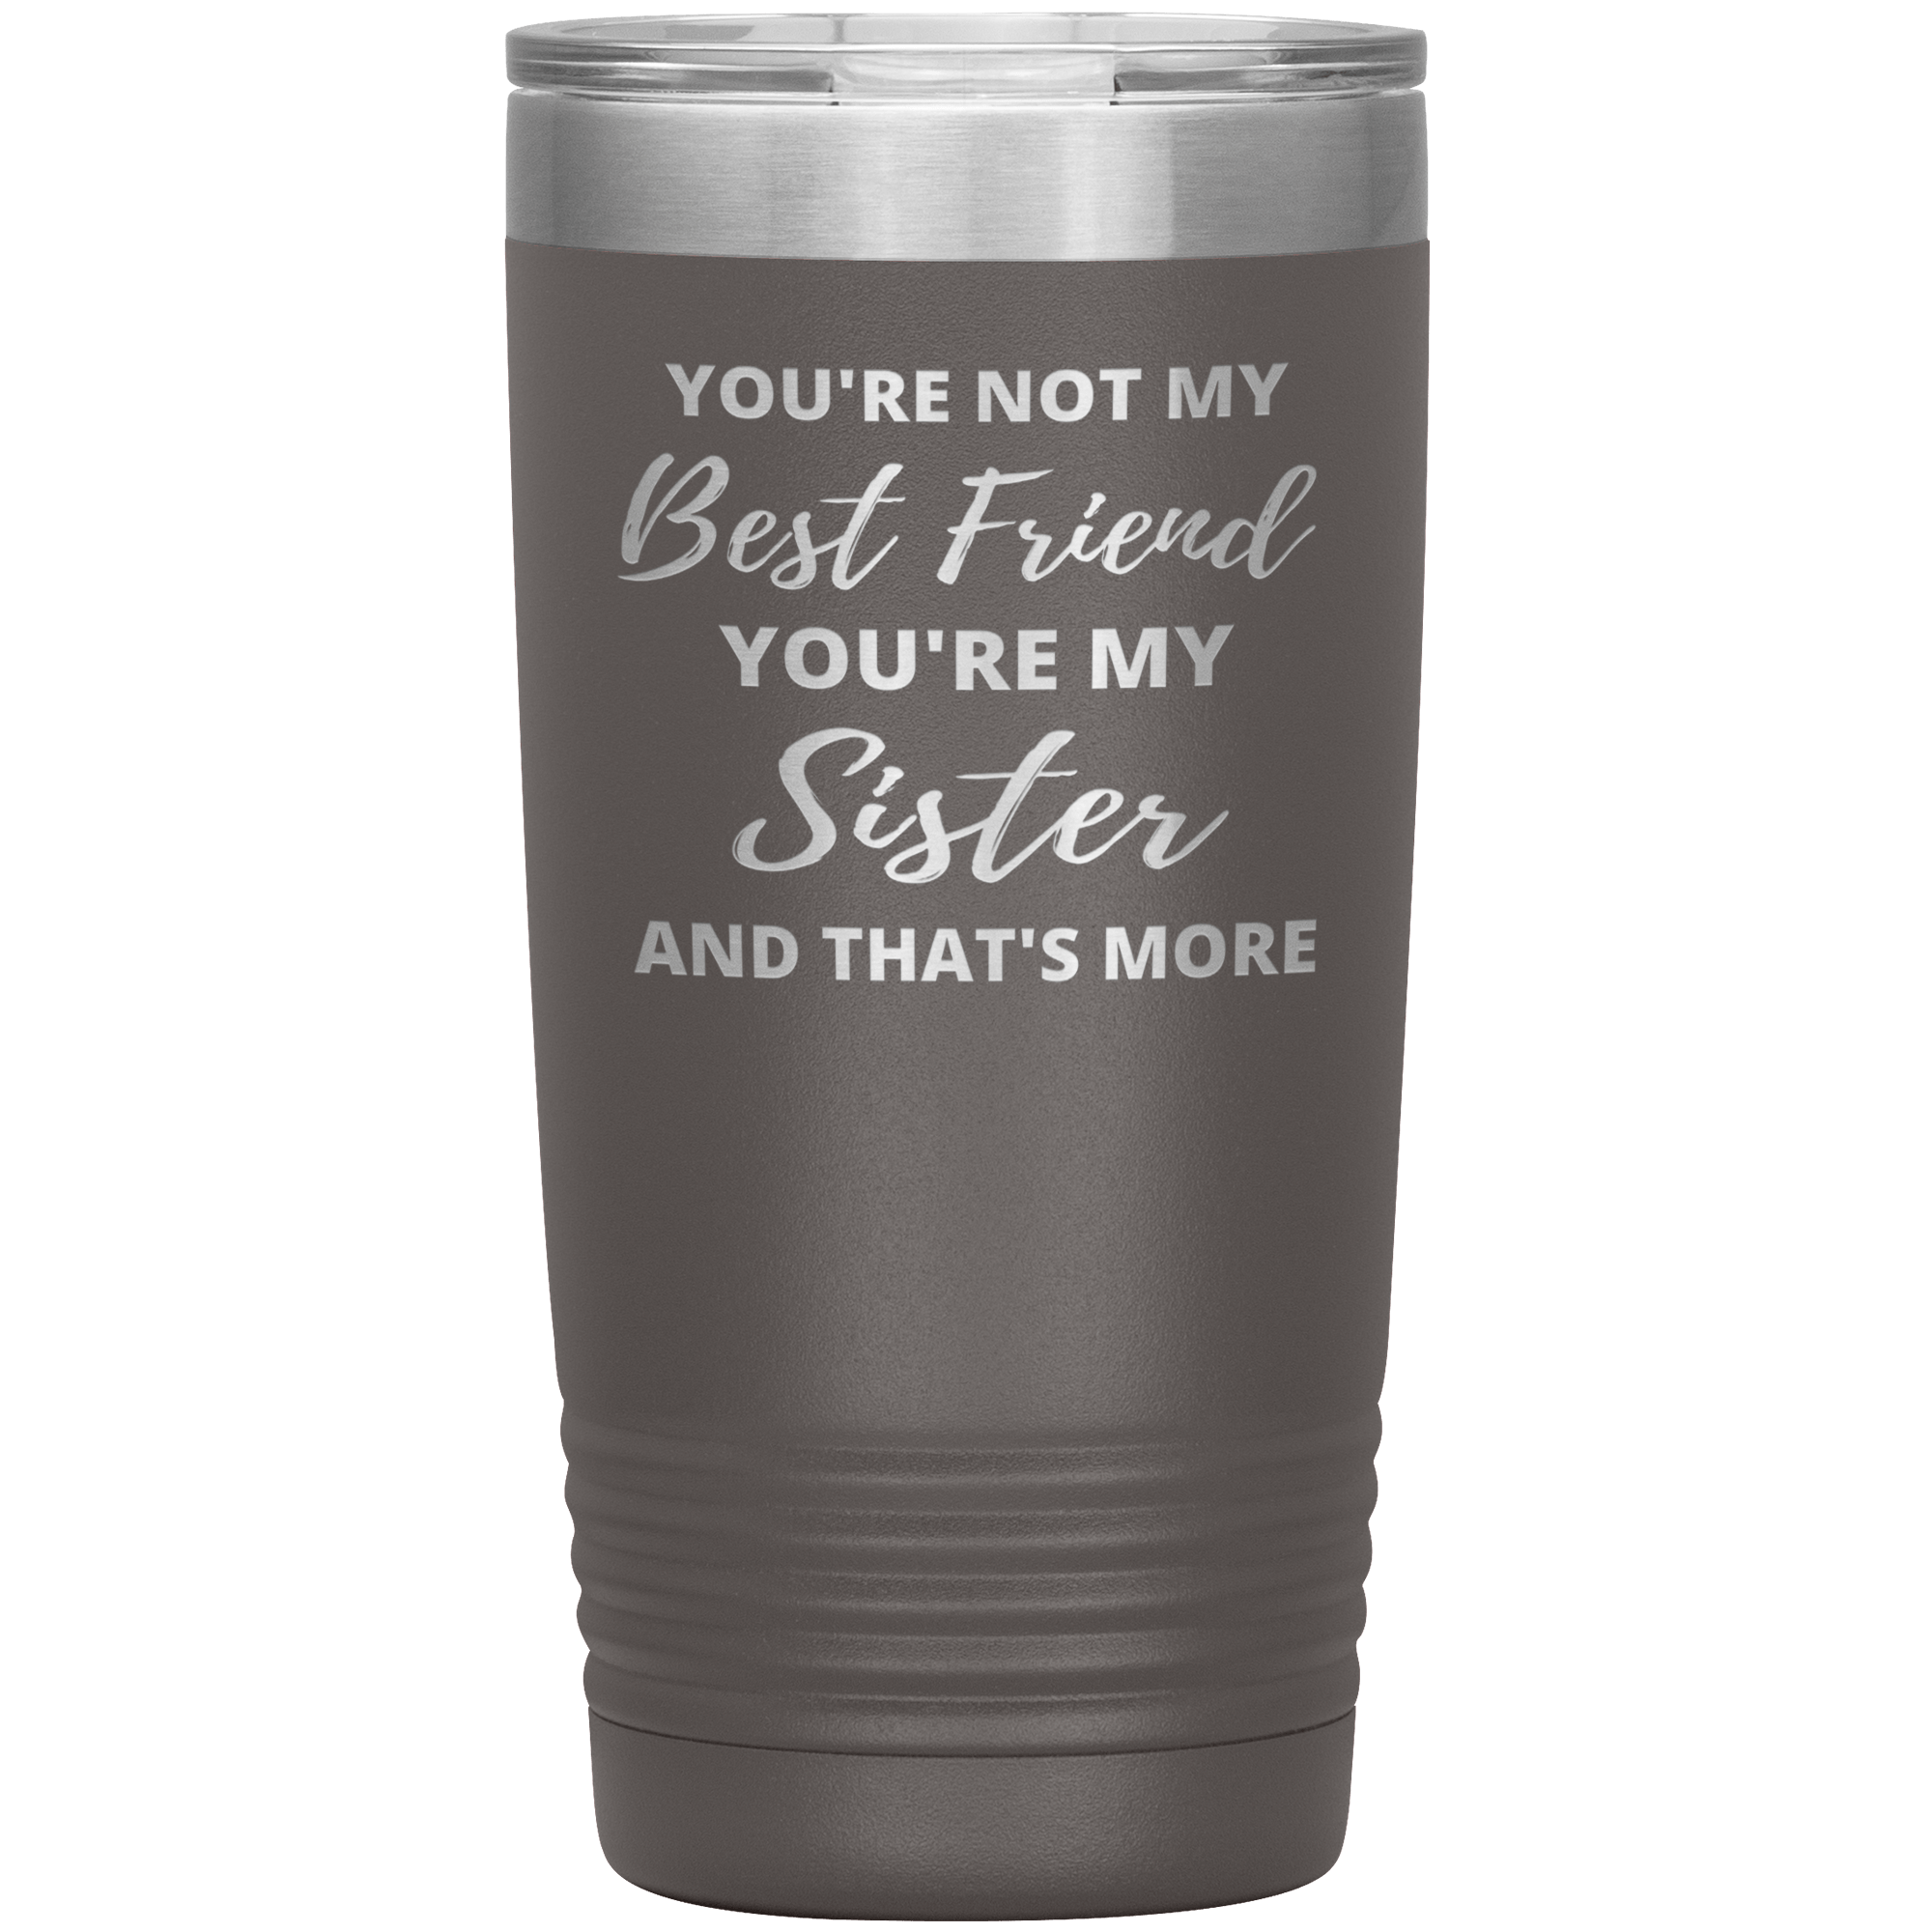 "YOU'RE NOT MY BEST FRIEND YOU'RE MY SISTER" TUMBLER